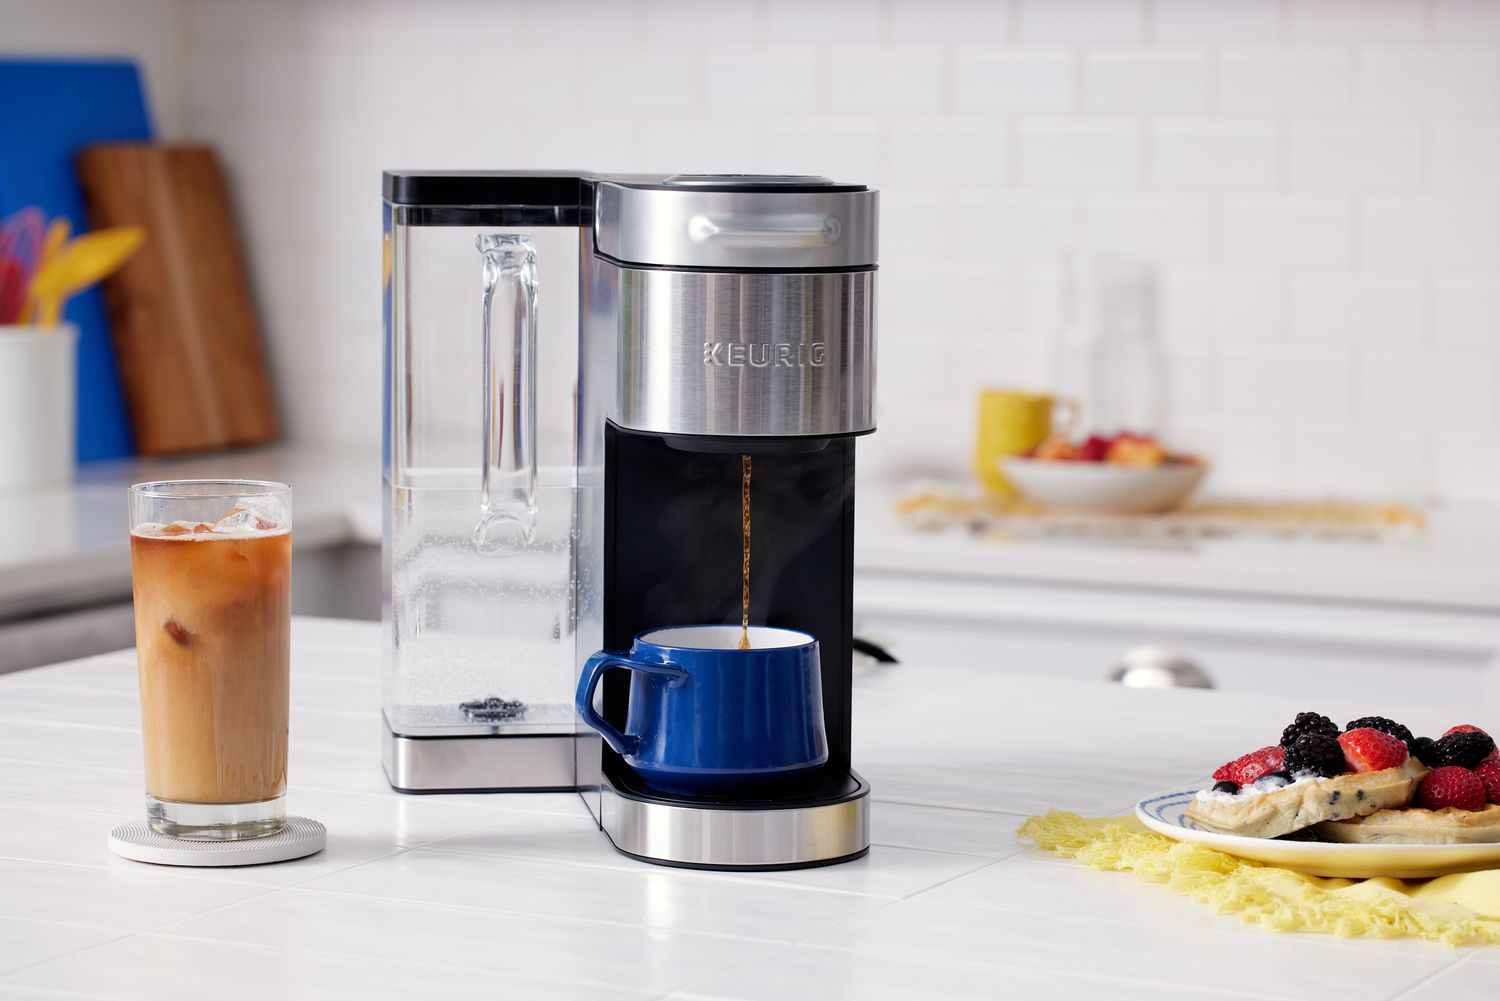 Keurig K-Supreme Plus pouring a cup of coffee next to a plate of pancakes